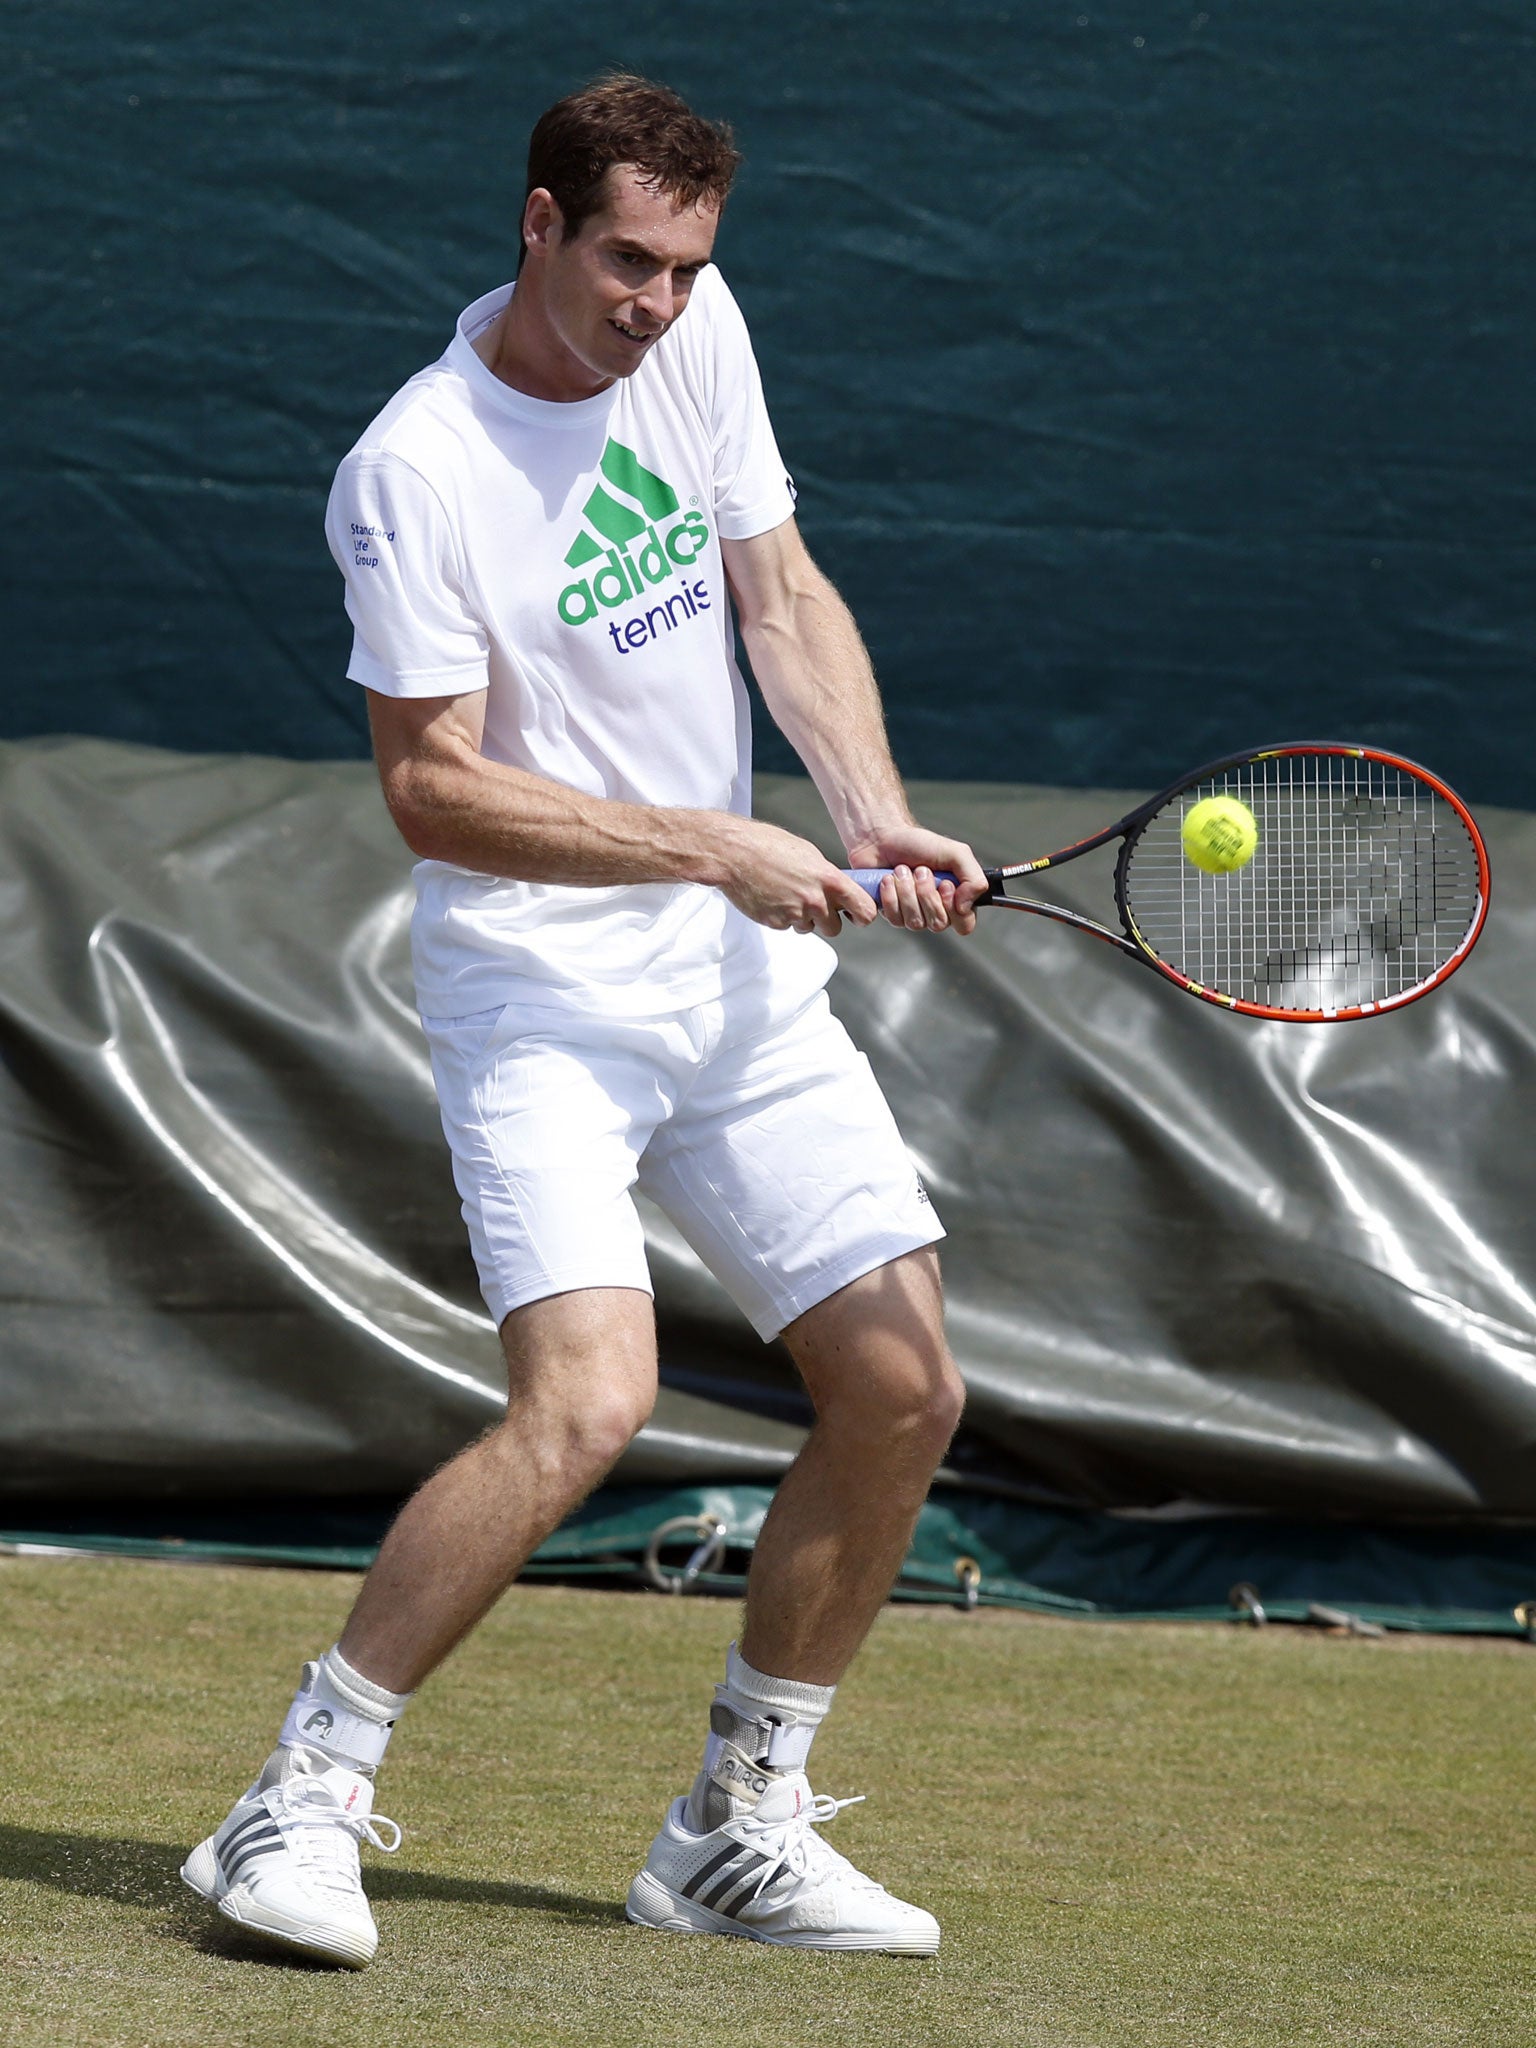 Andy Murray returns the ball during a practice session